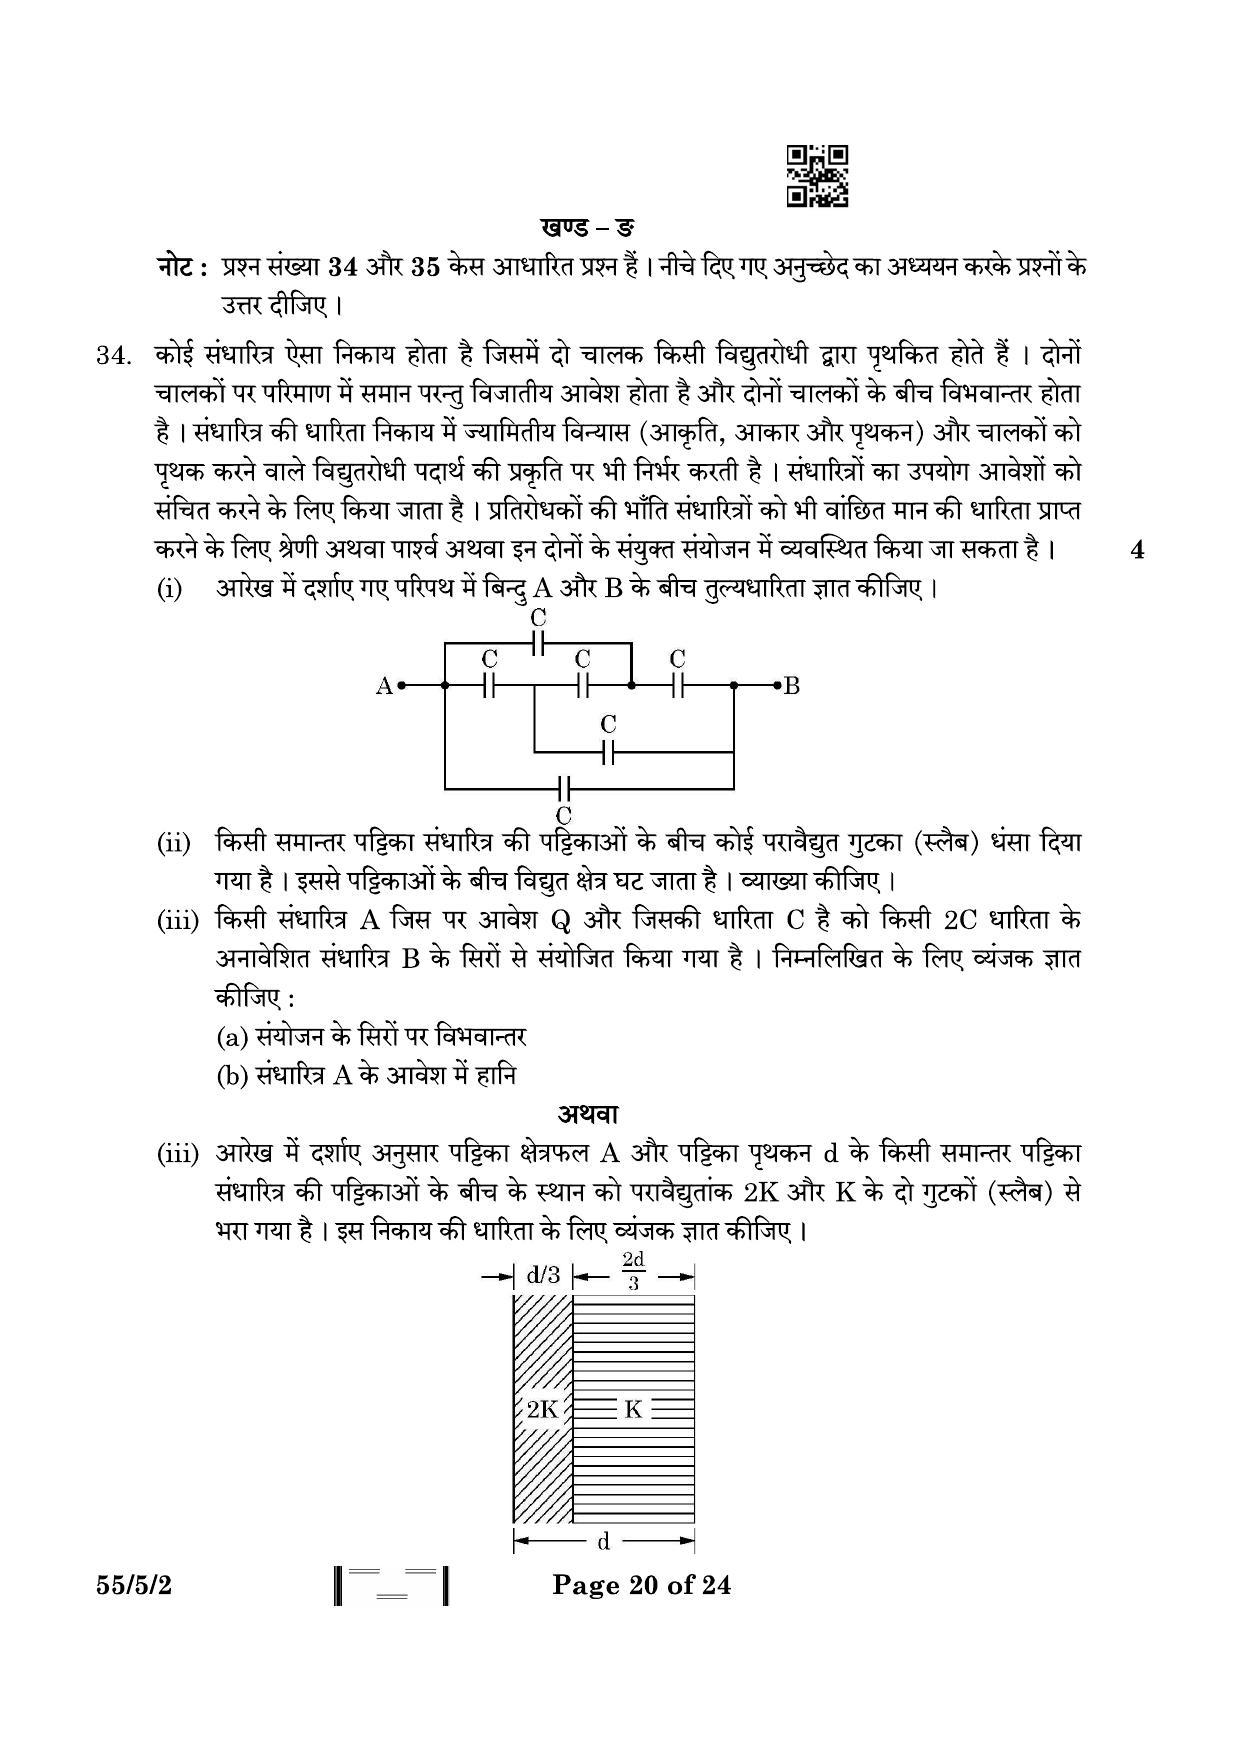 CBSE Class 12 55-5-2 Physics 2023 Question Paper - Page 20